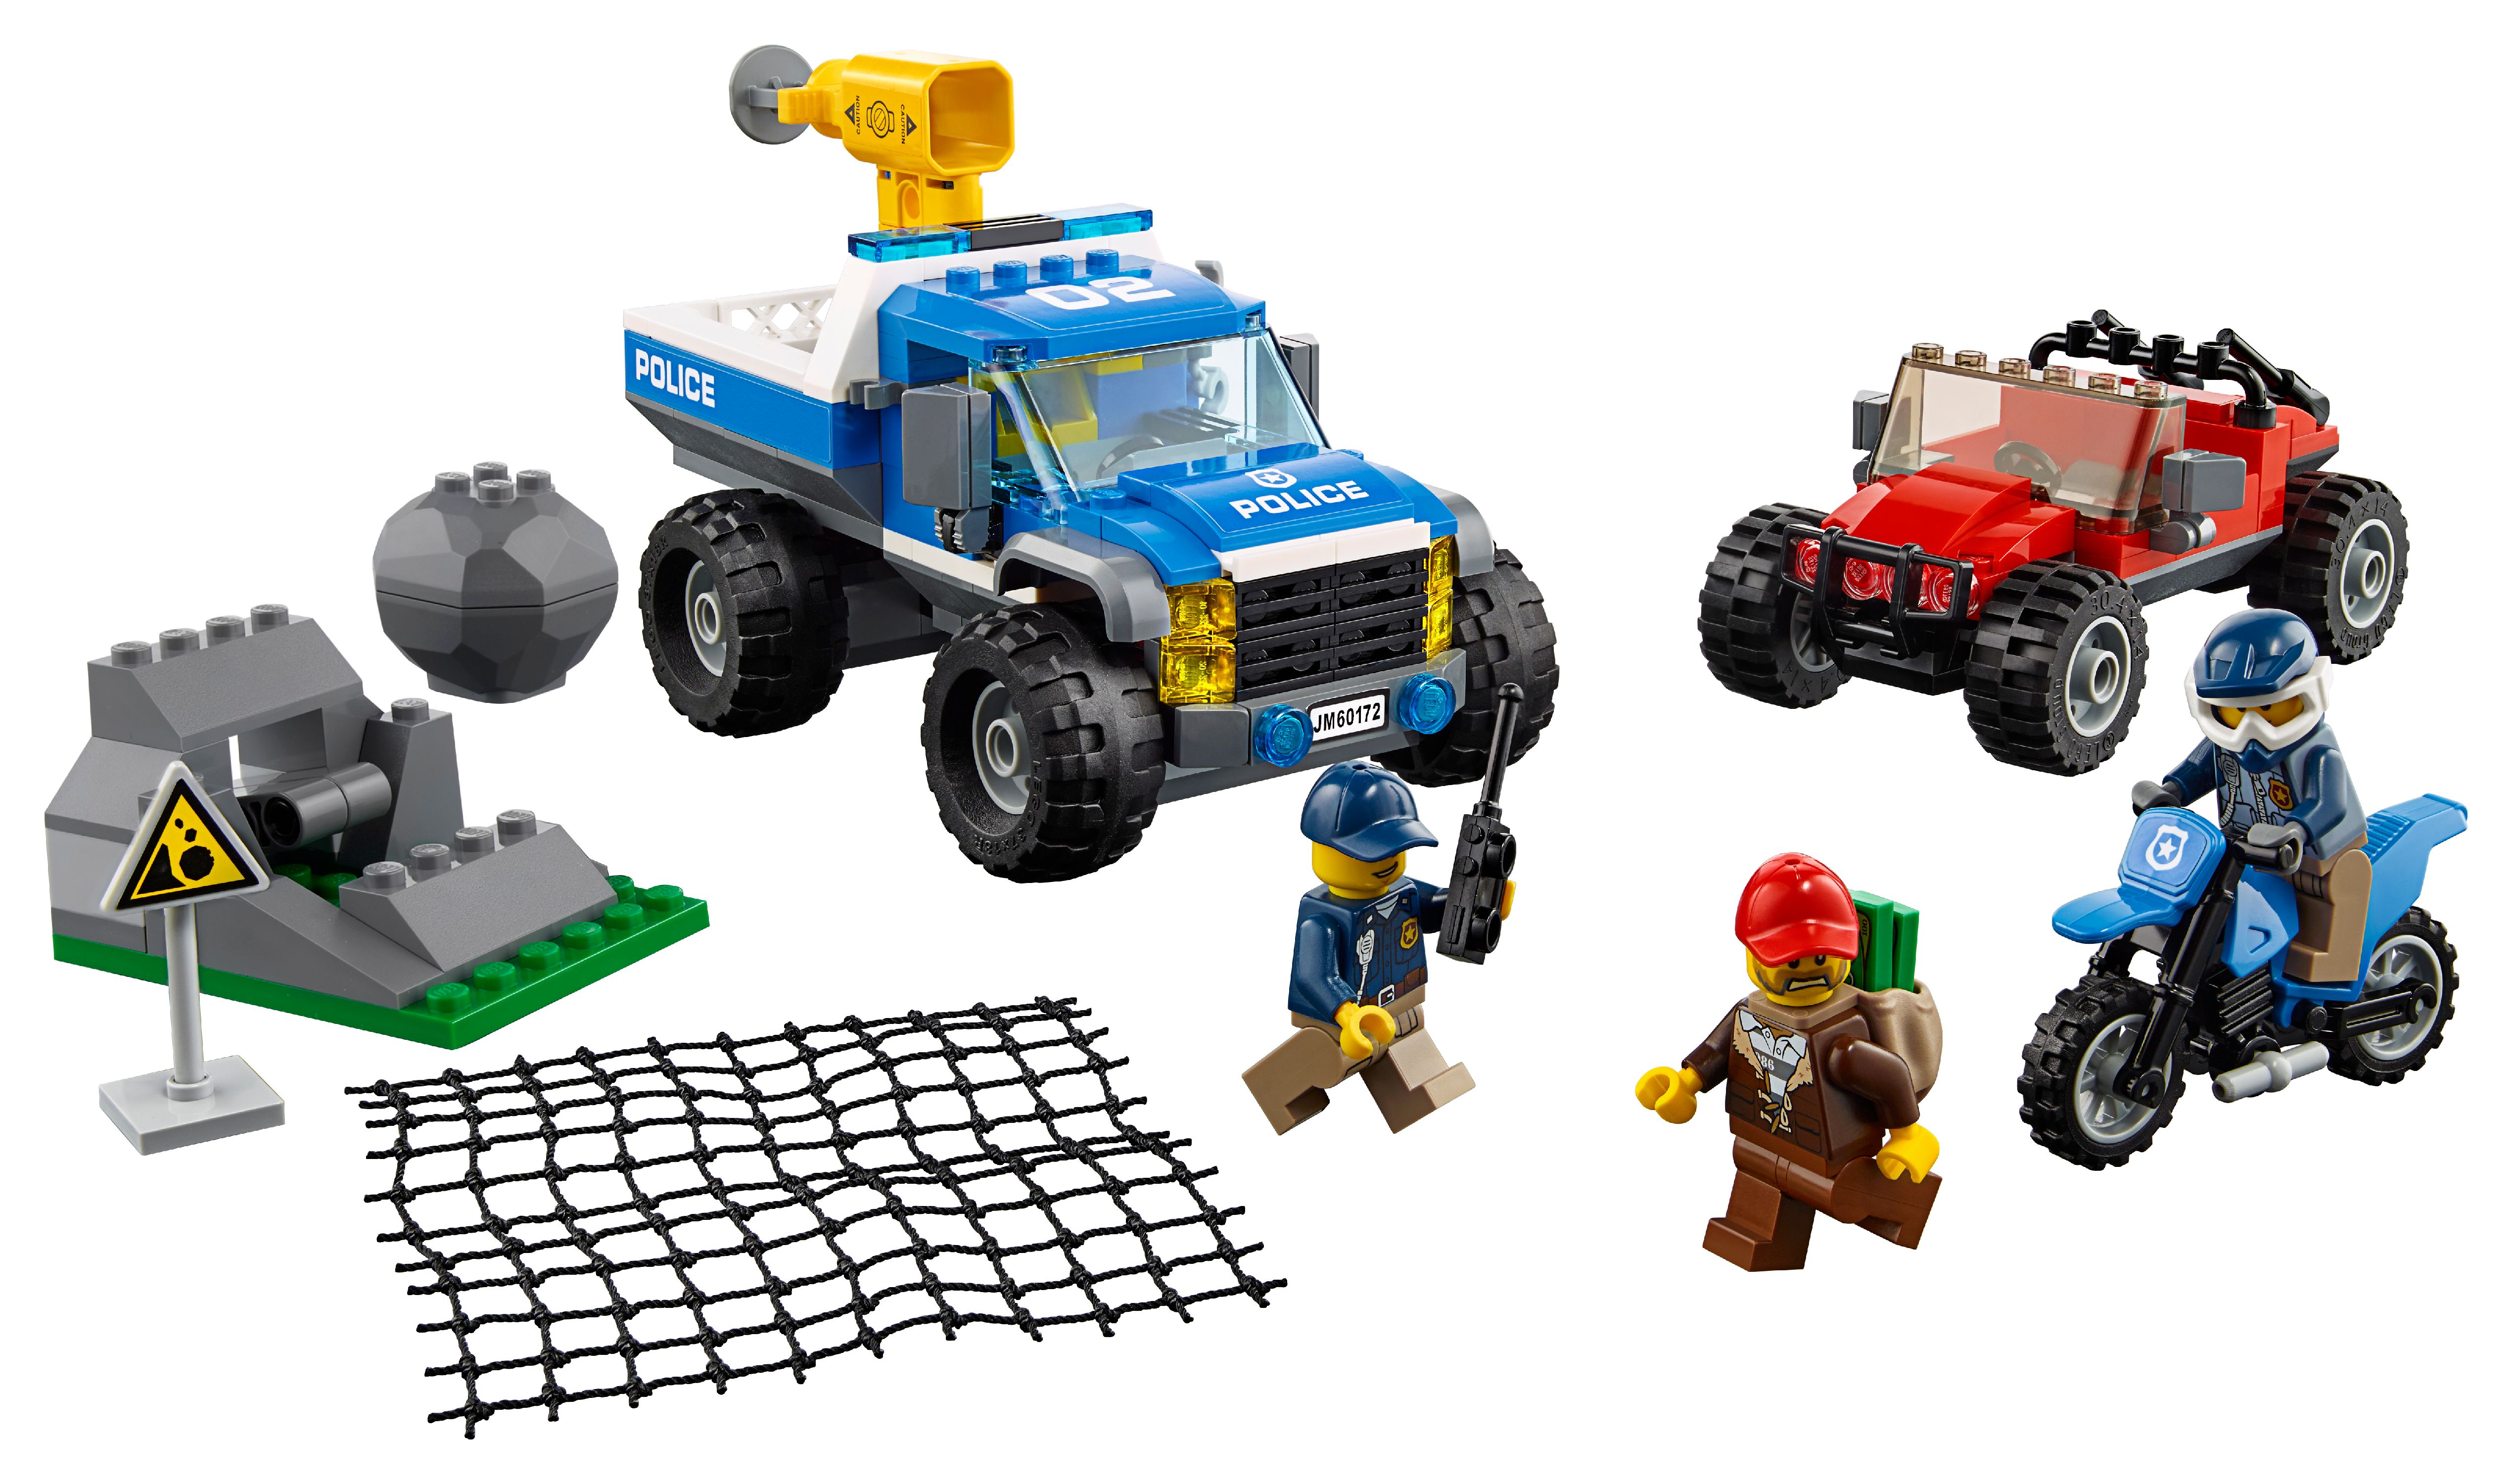 LEGO City Police Dirt Road Pursuit 60172 - image 1 of 5